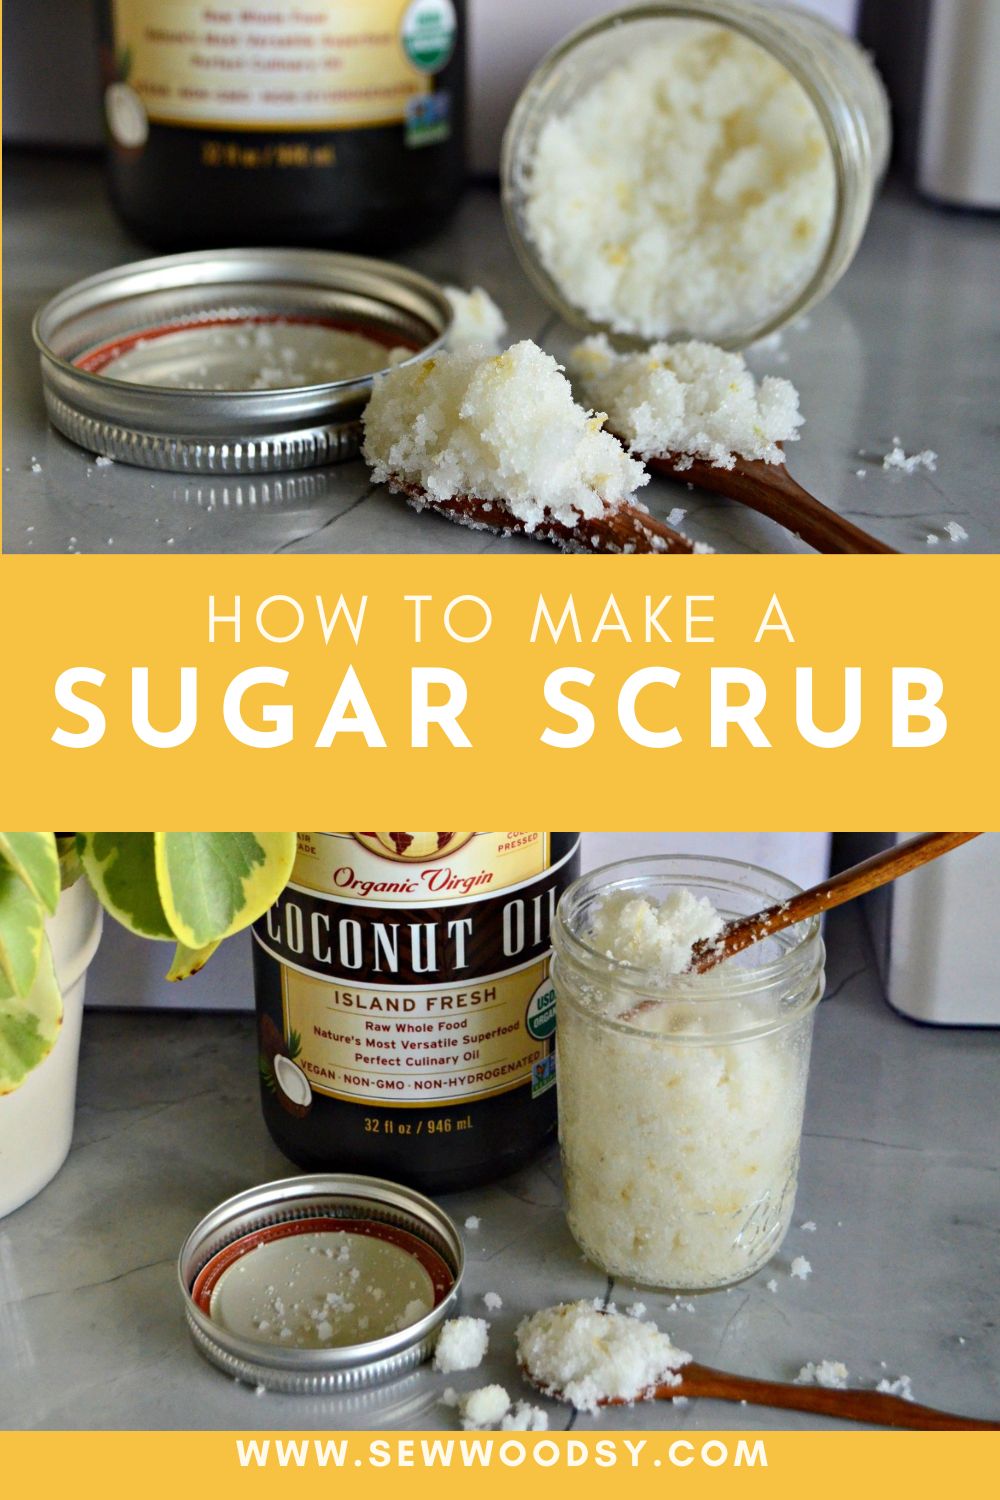 Two photos of sugar scrub in a mason jar with recipe title text on image for Pinterest.